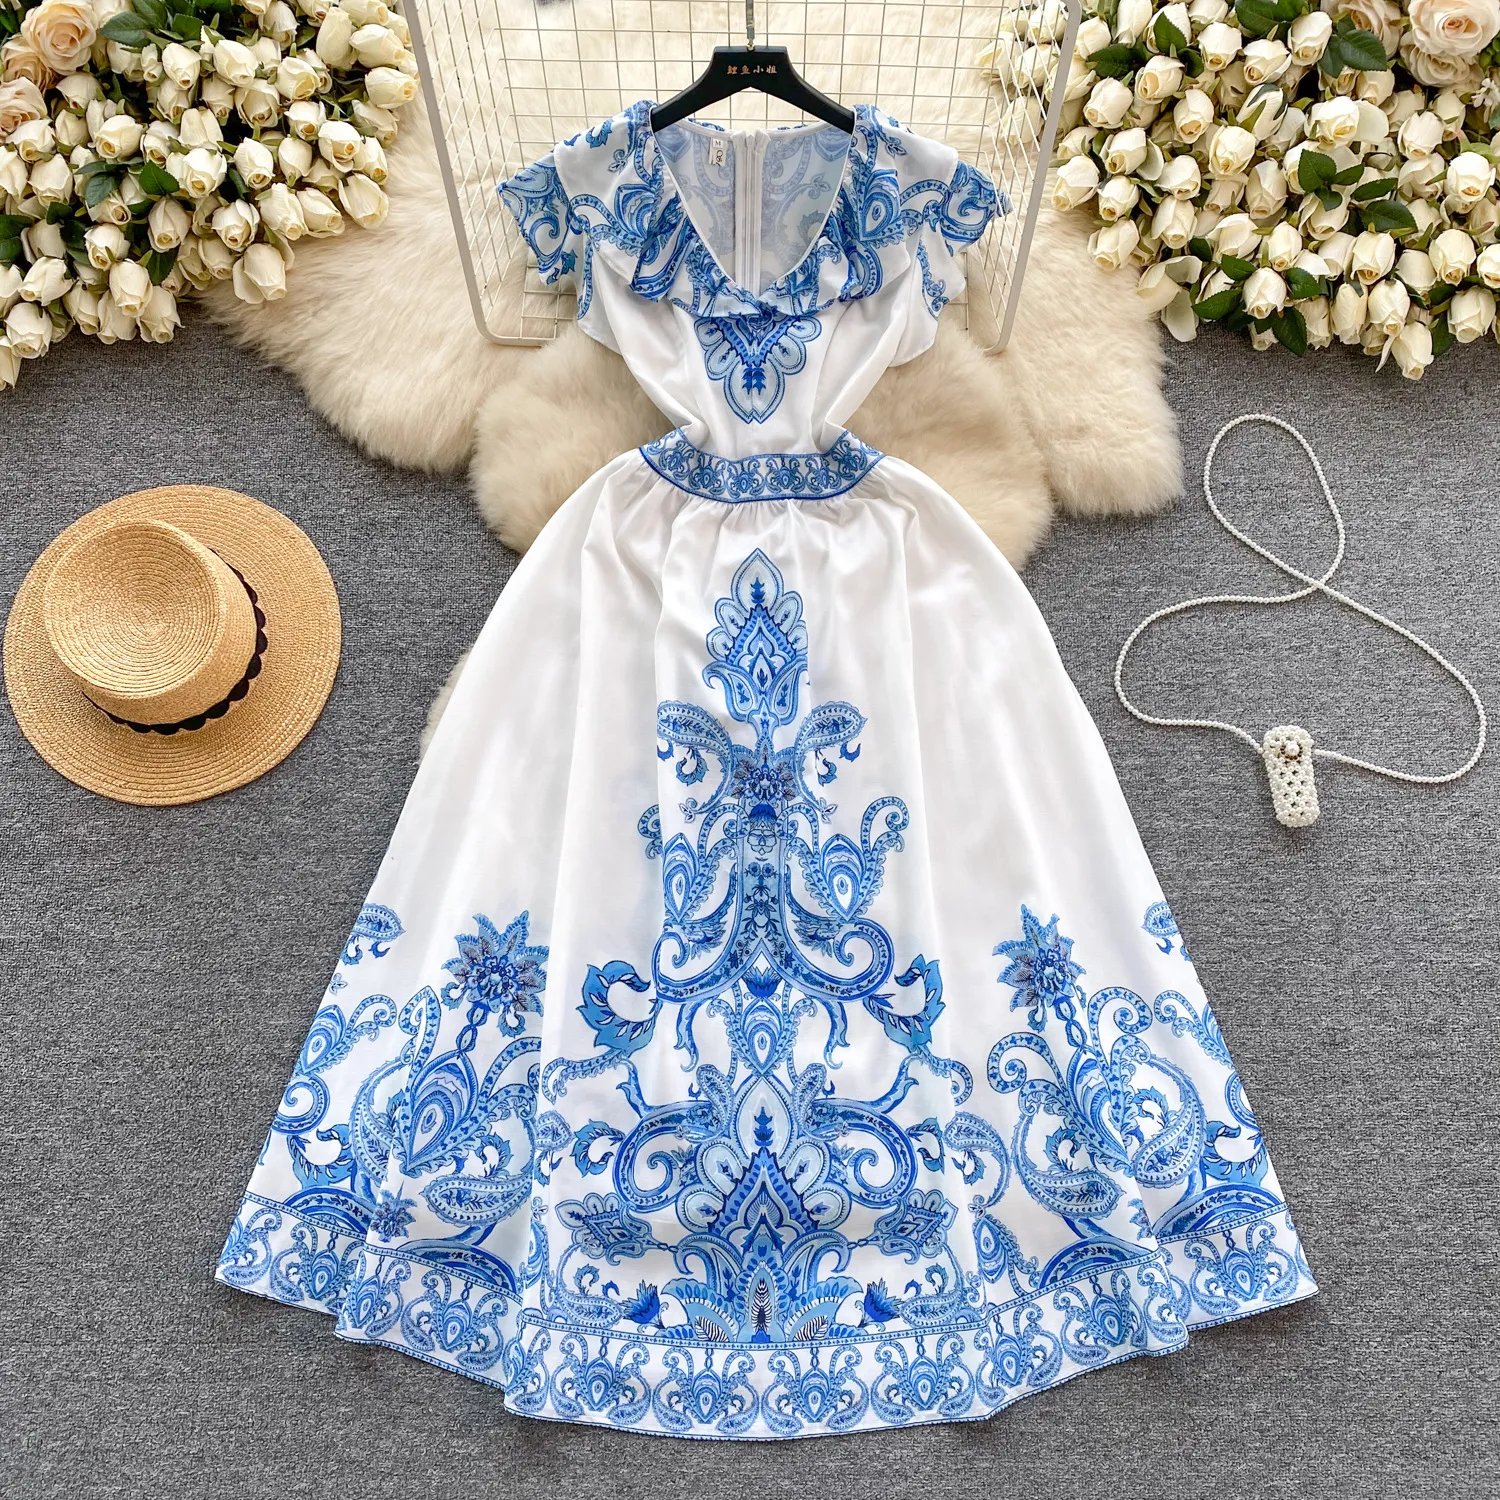 French court style retro print design with ruffle edge V-neck and waist closure for a slim and elongated look. This is a stylish spring dress